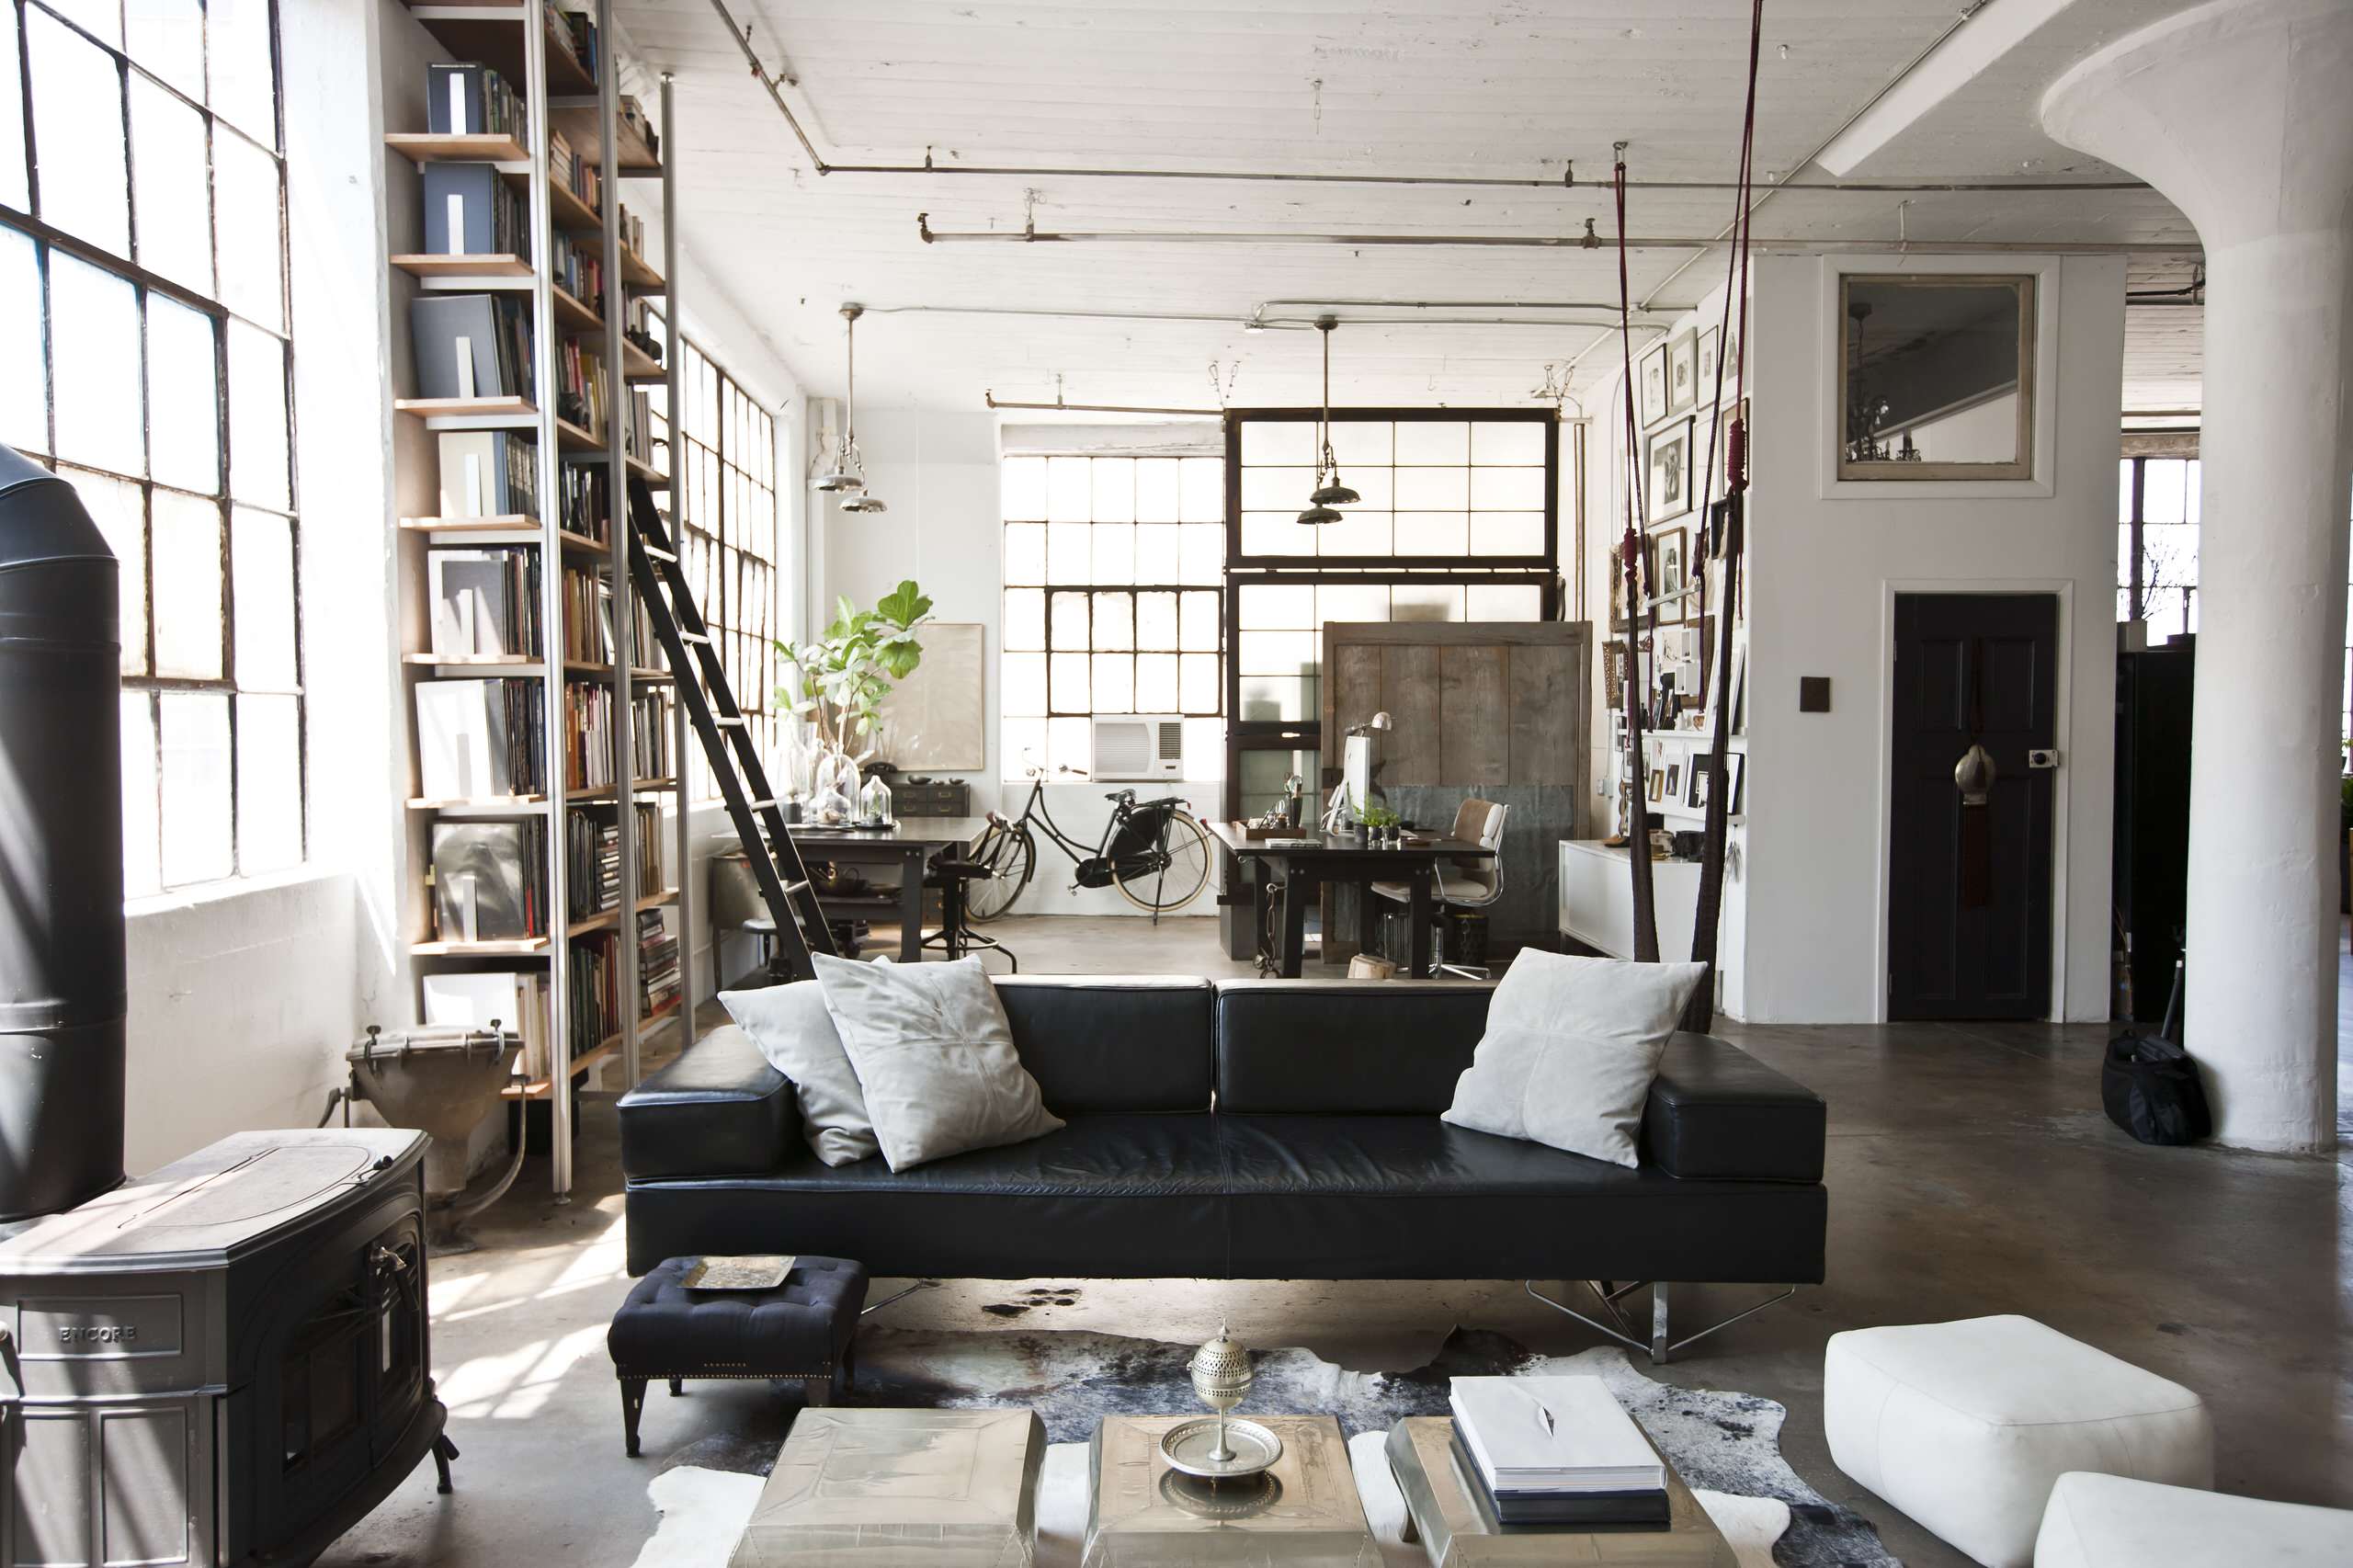 Modern industrial style (from Houzz)